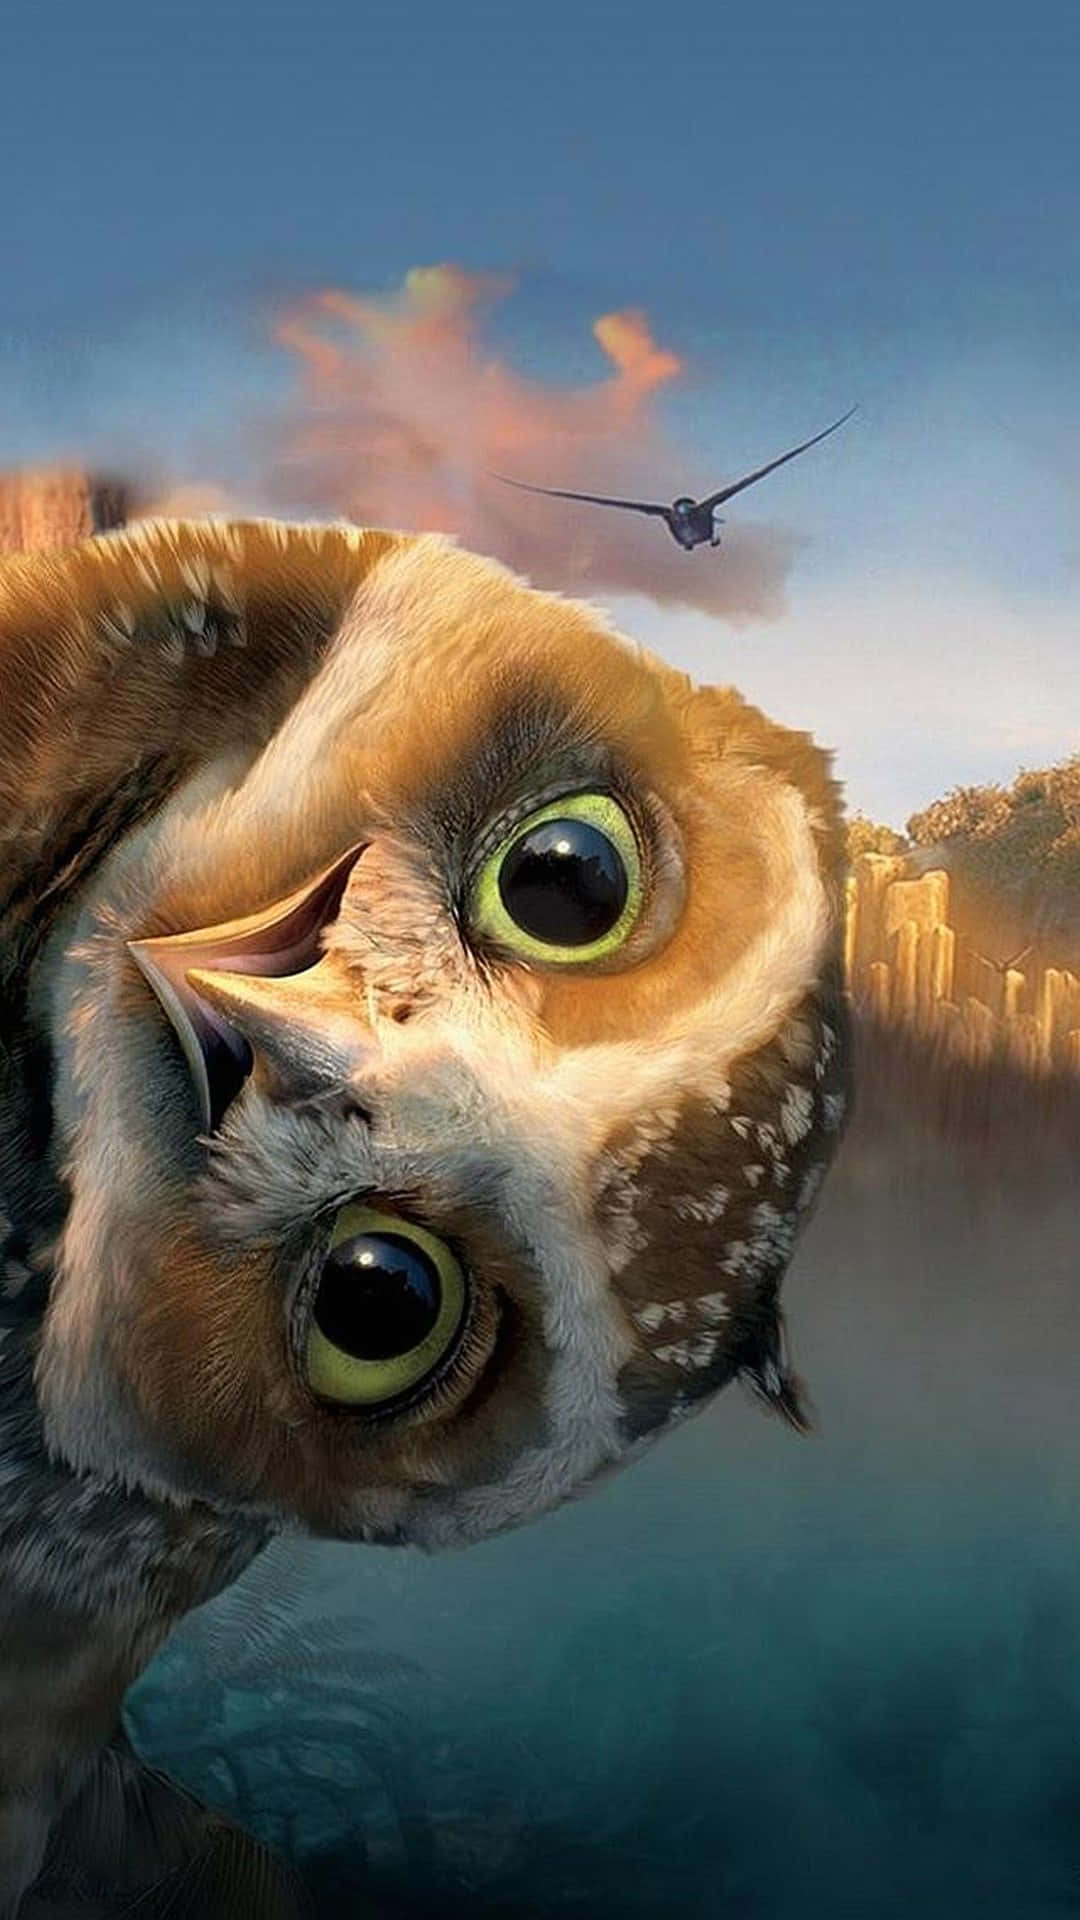 A Picture Of An Owl With A Plane In The Background Background